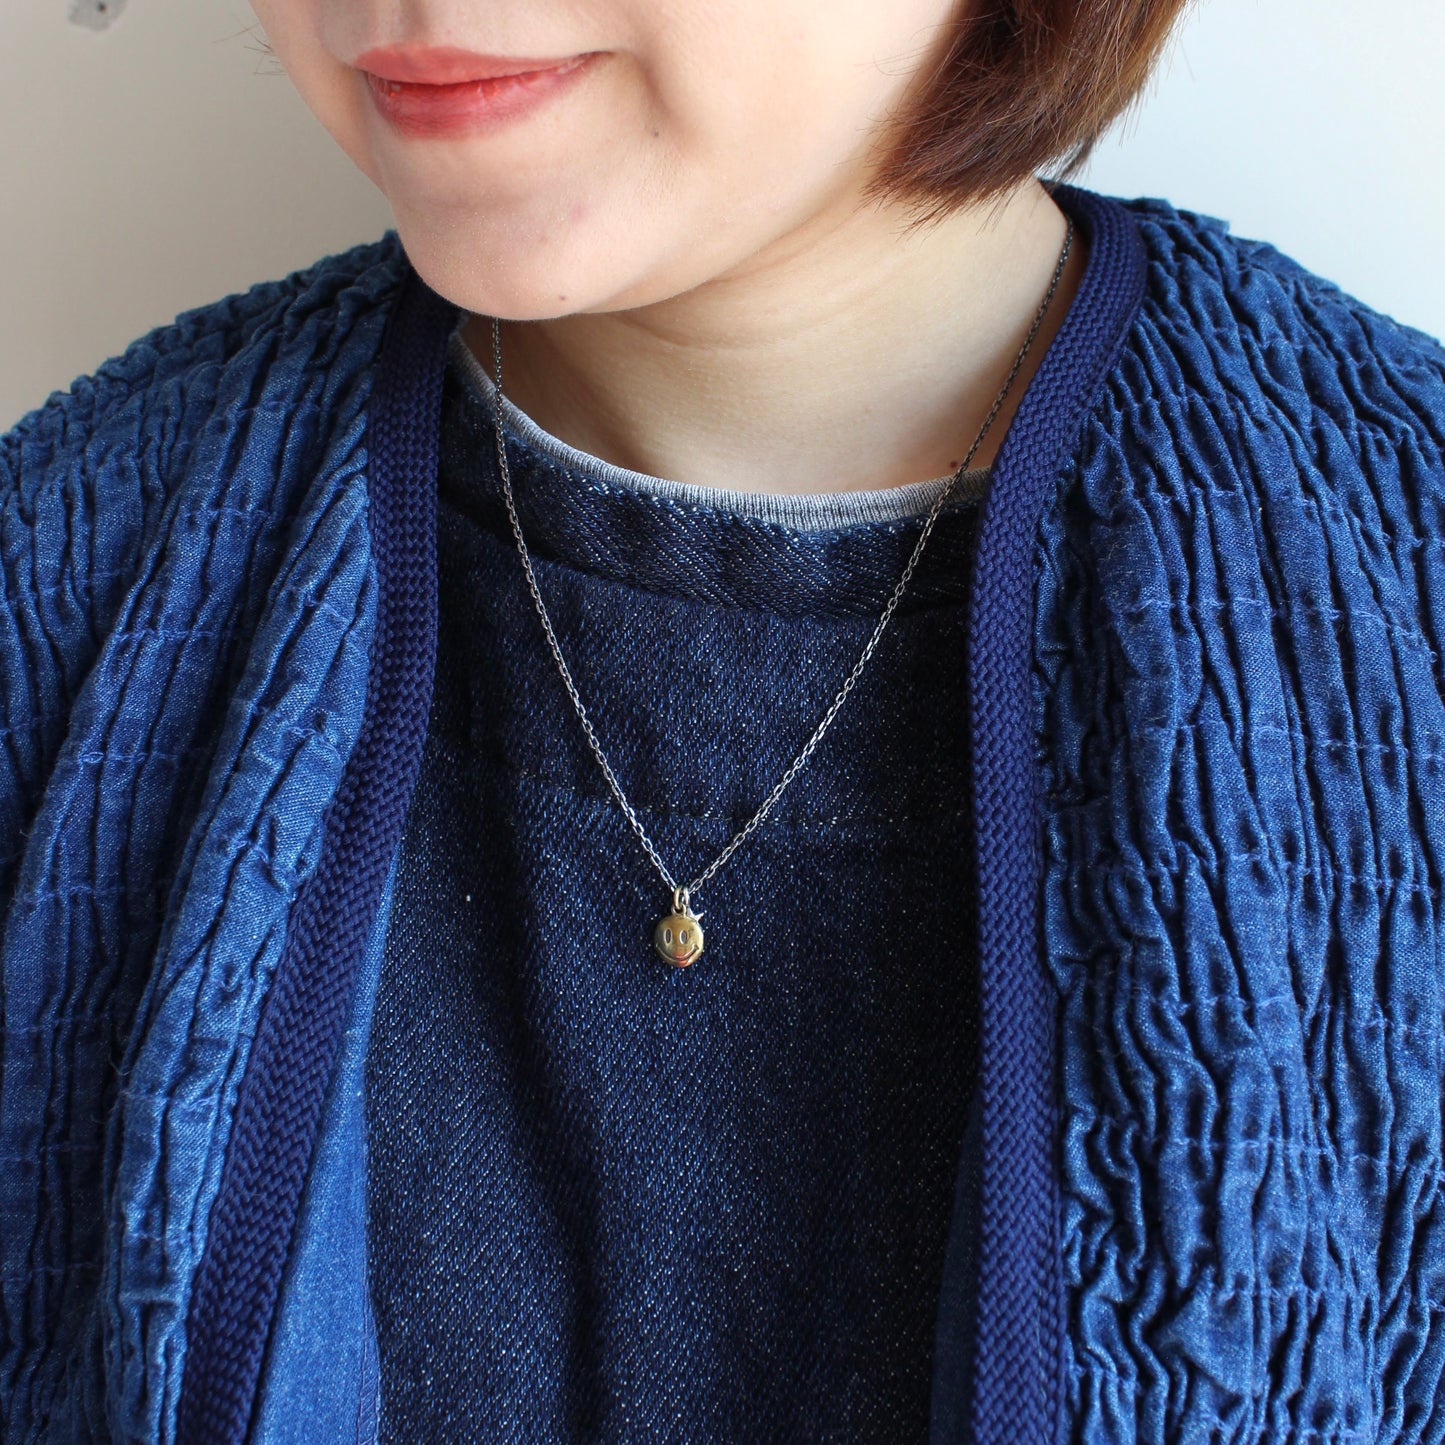 Atease - SMILE NECKLACE